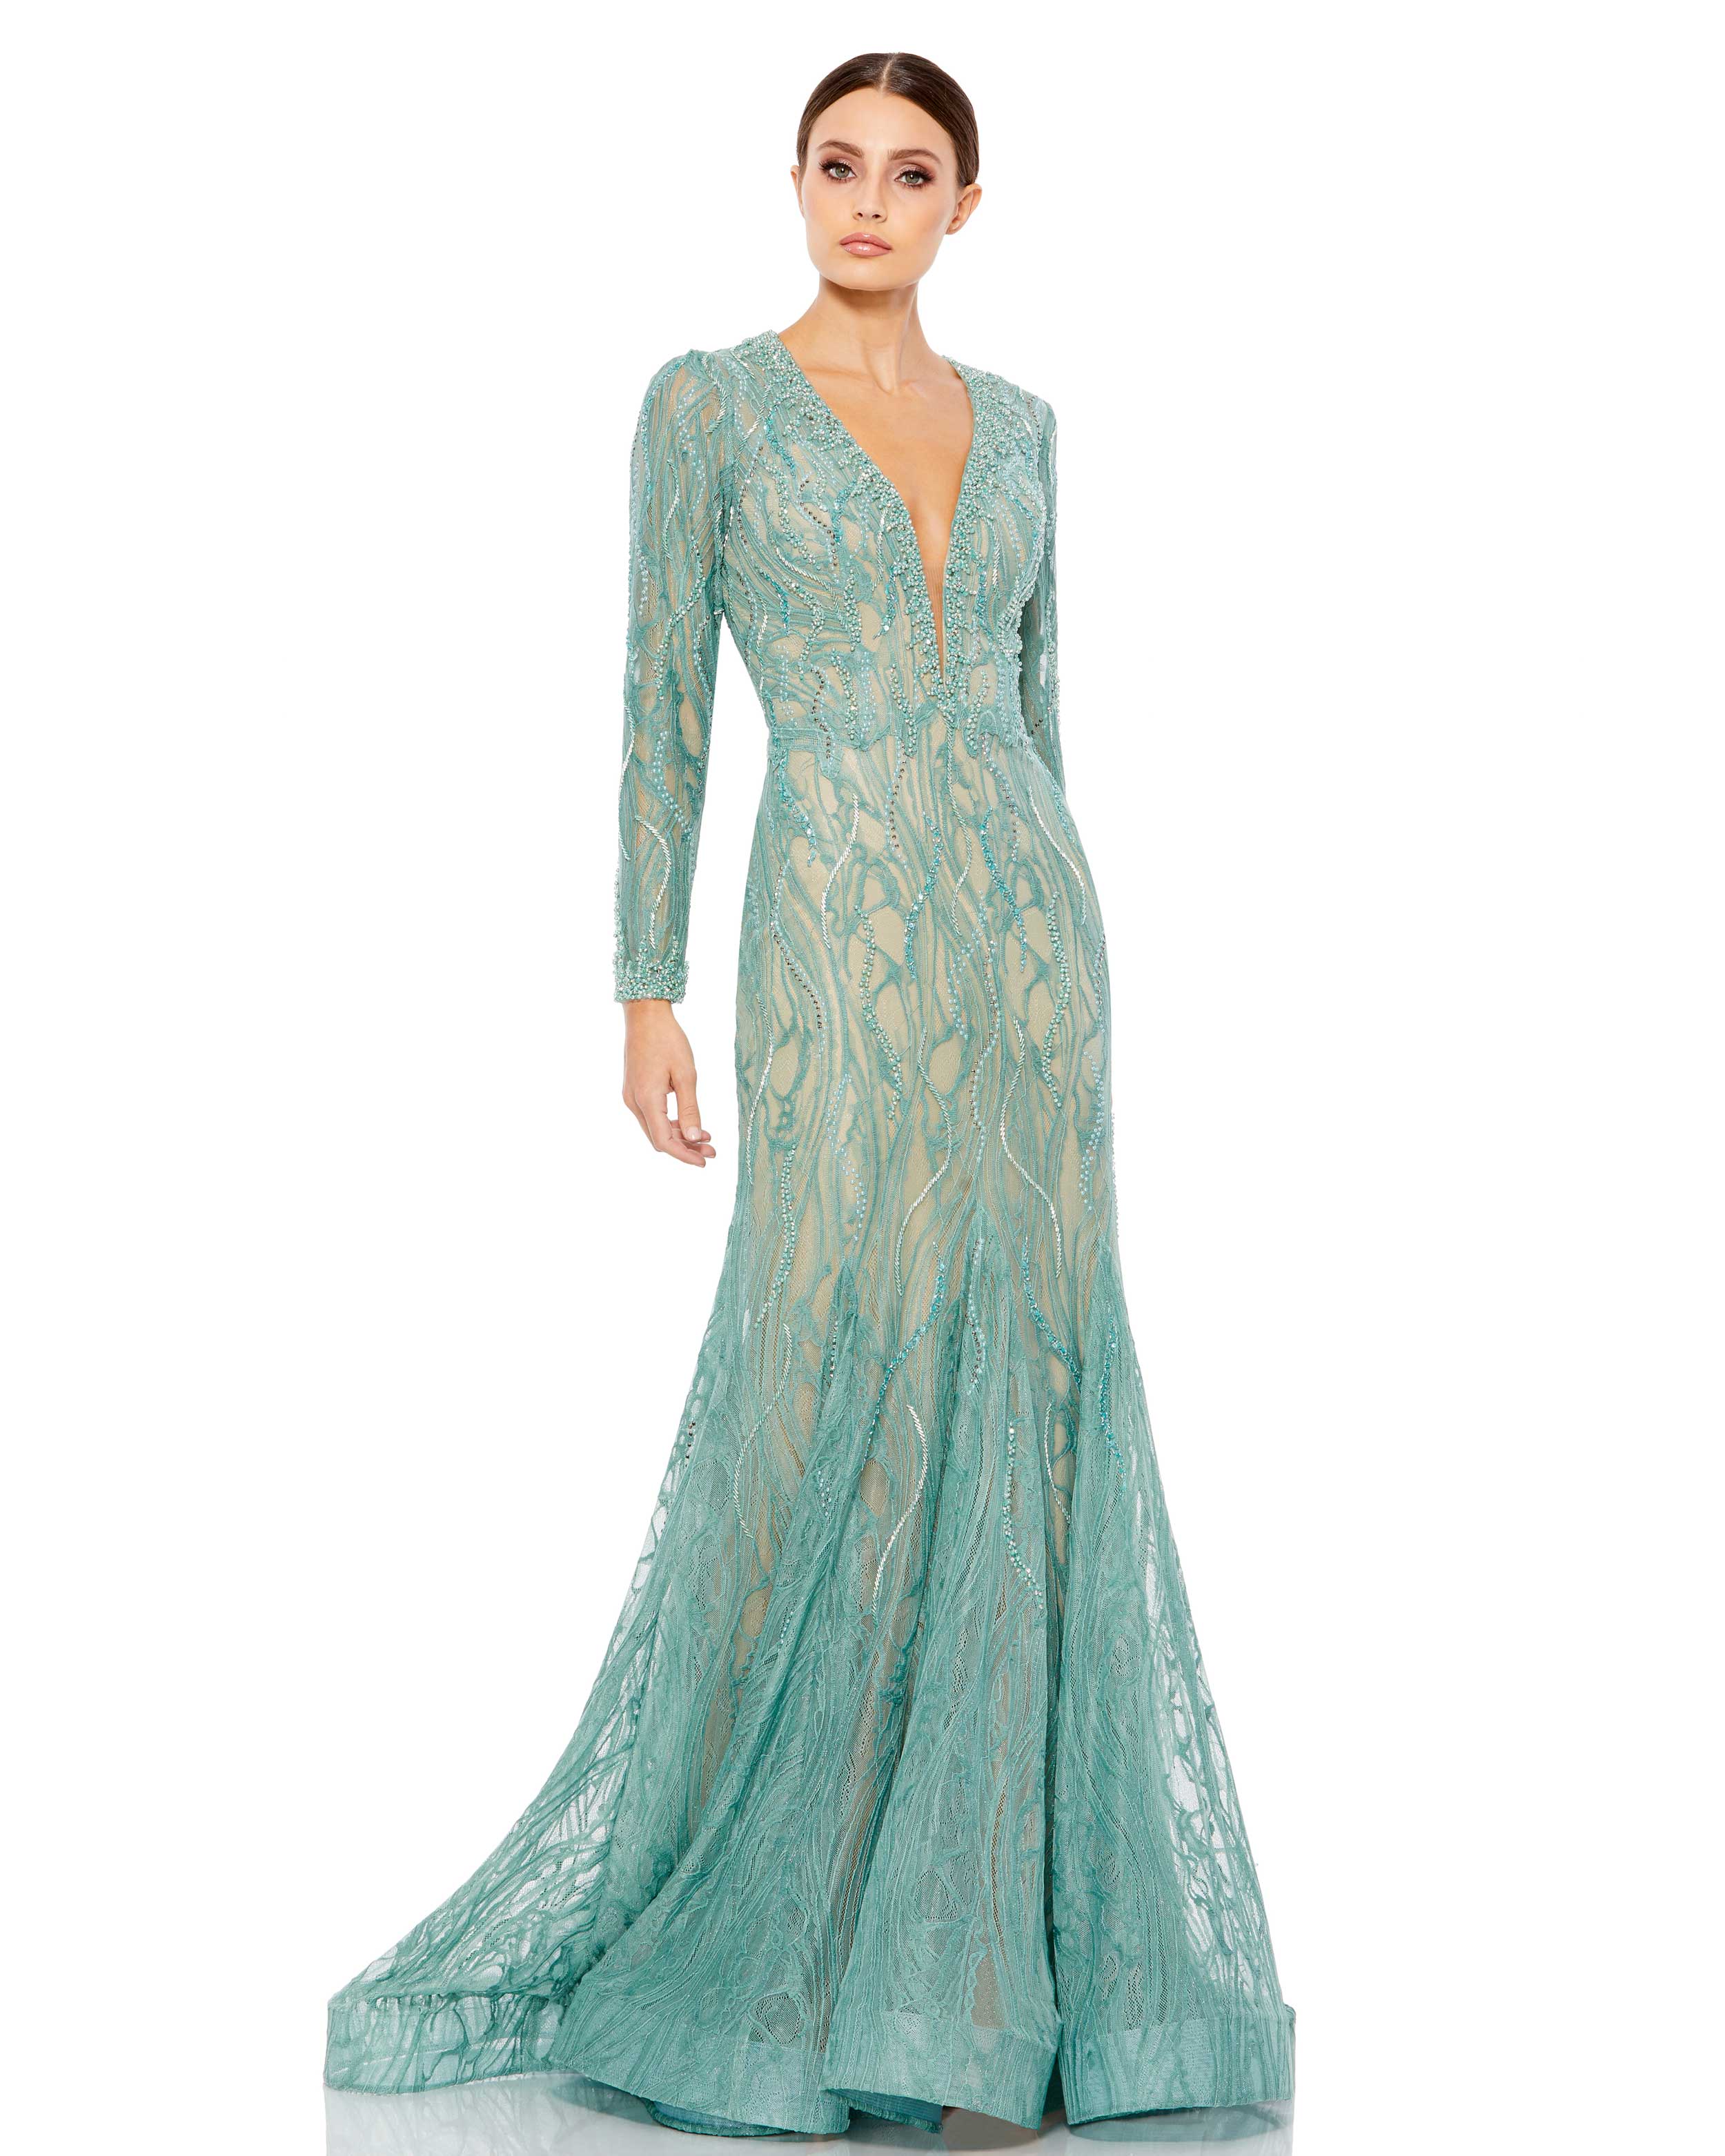 Beaded Illusion Long Sleeve Plunge Neck Gown